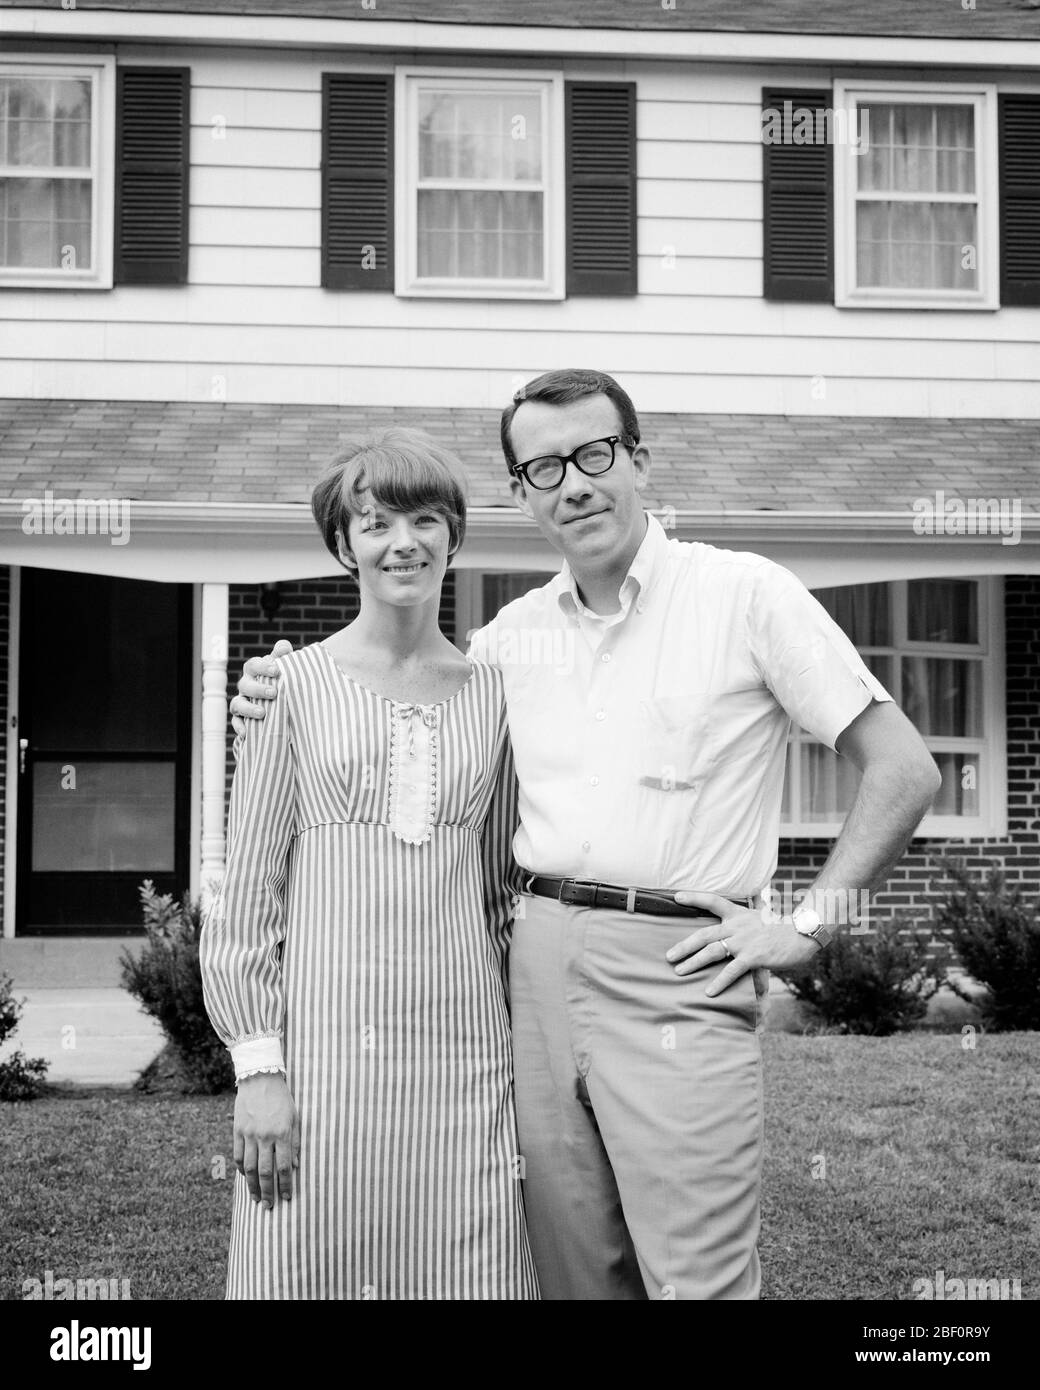 1960s COUPLE STANDING IN FRONT OF THEIR HOME MAN HAS ARM AROUND WIFE’S SHOULDERS WOMAN WEARING STRIPED DRESS - s15491 HAR001 HARS LIFESTYLE SATISFACTION FEMALES HOUSES STRIPED MARRIED SPOUSE HUSBANDS HOME LIFE COPY SPACE FRIENDSHIP HALF-LENGTH LADIES PERSONS RESIDENTIAL MALES BUILDINGS CONFIDENCE B&W PARTNER EYE CONTACT DREAMS HAPPINESS CHEERFUL EXTERIOR PRIDE HOMES SMILES CONNECTION JOYFUL RESIDENCE STYLISH IN FRONT OF DREAM HOUSE COOPERATION MID-ADULT MID-ADULT MAN MID-ADULT WOMAN TOGETHERNESS WIVES YOUNG ADULT MAN YOUNG ADULT WOMAN BLACK AND WHITE CAUCASIAN ETHNICITY HAR001 OLD FASHIONED Stock Photo